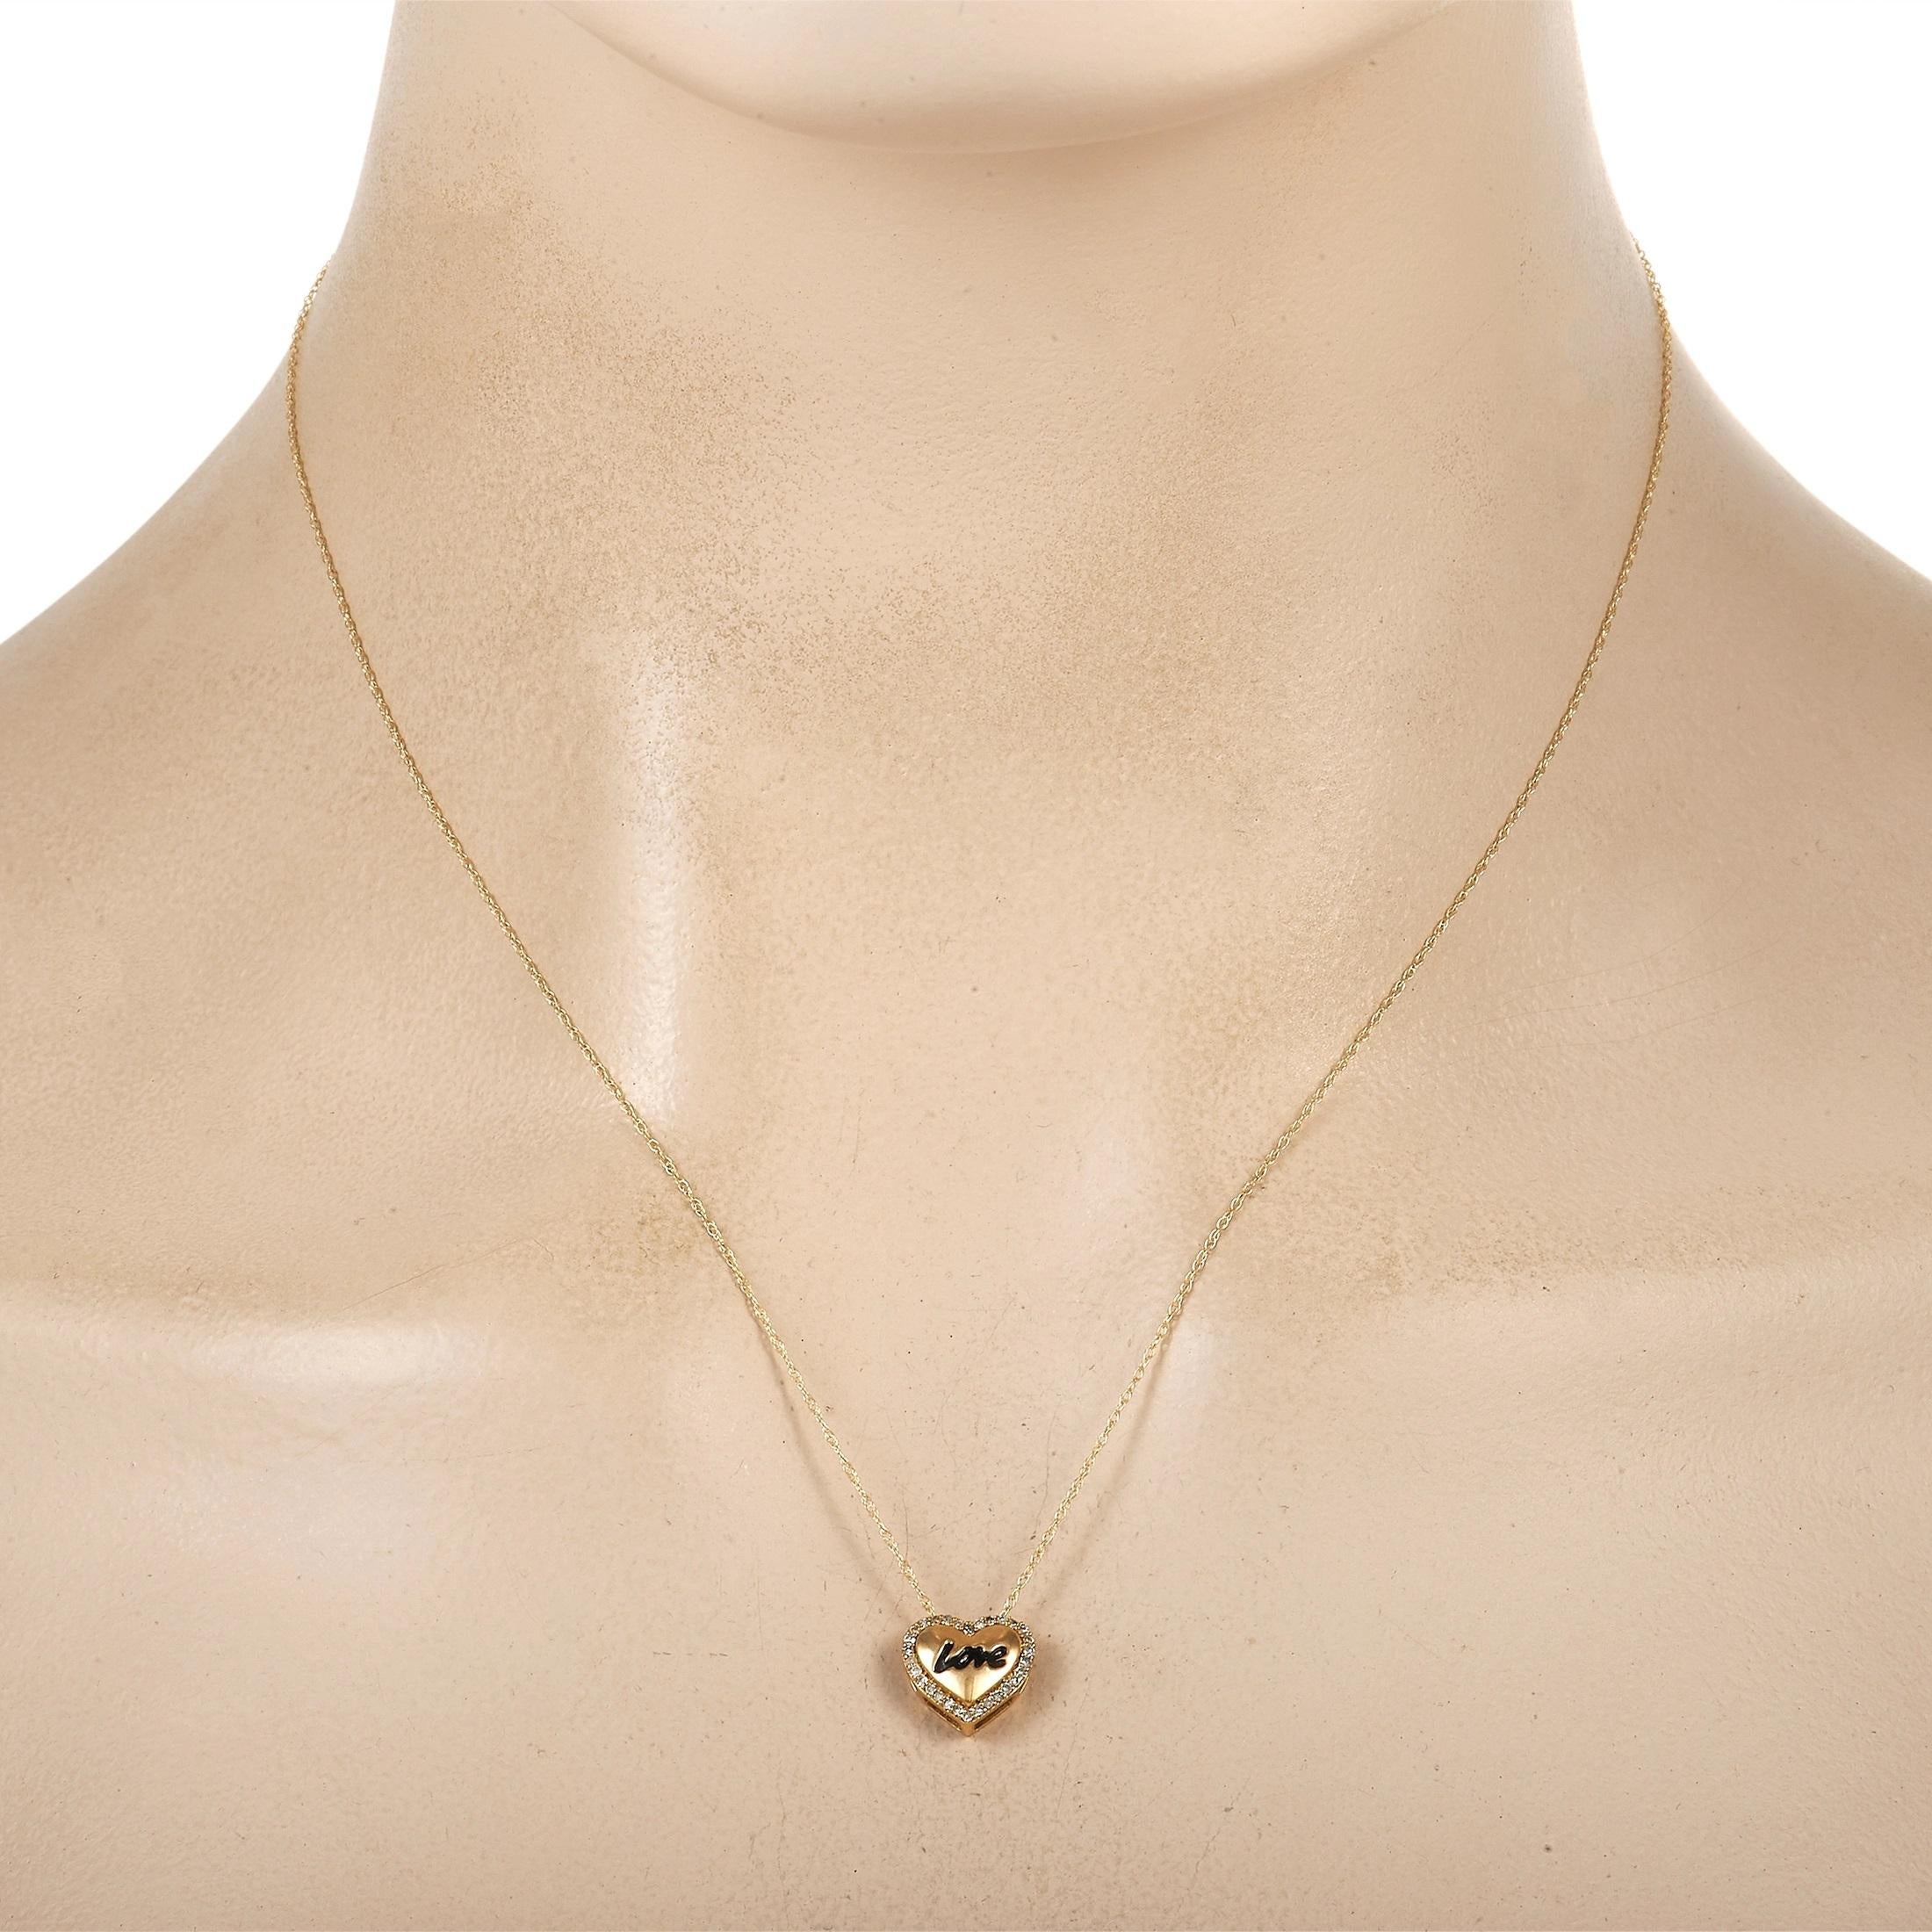 Put your love boldly on display with this alluring necklace. Crafted from 14K Yellow Gold, the heart shaped pendant pairs the word “love” in a stylish script with diamonds totaling 0.10 carats. It measures 0.45” round and is suspended on a delicate